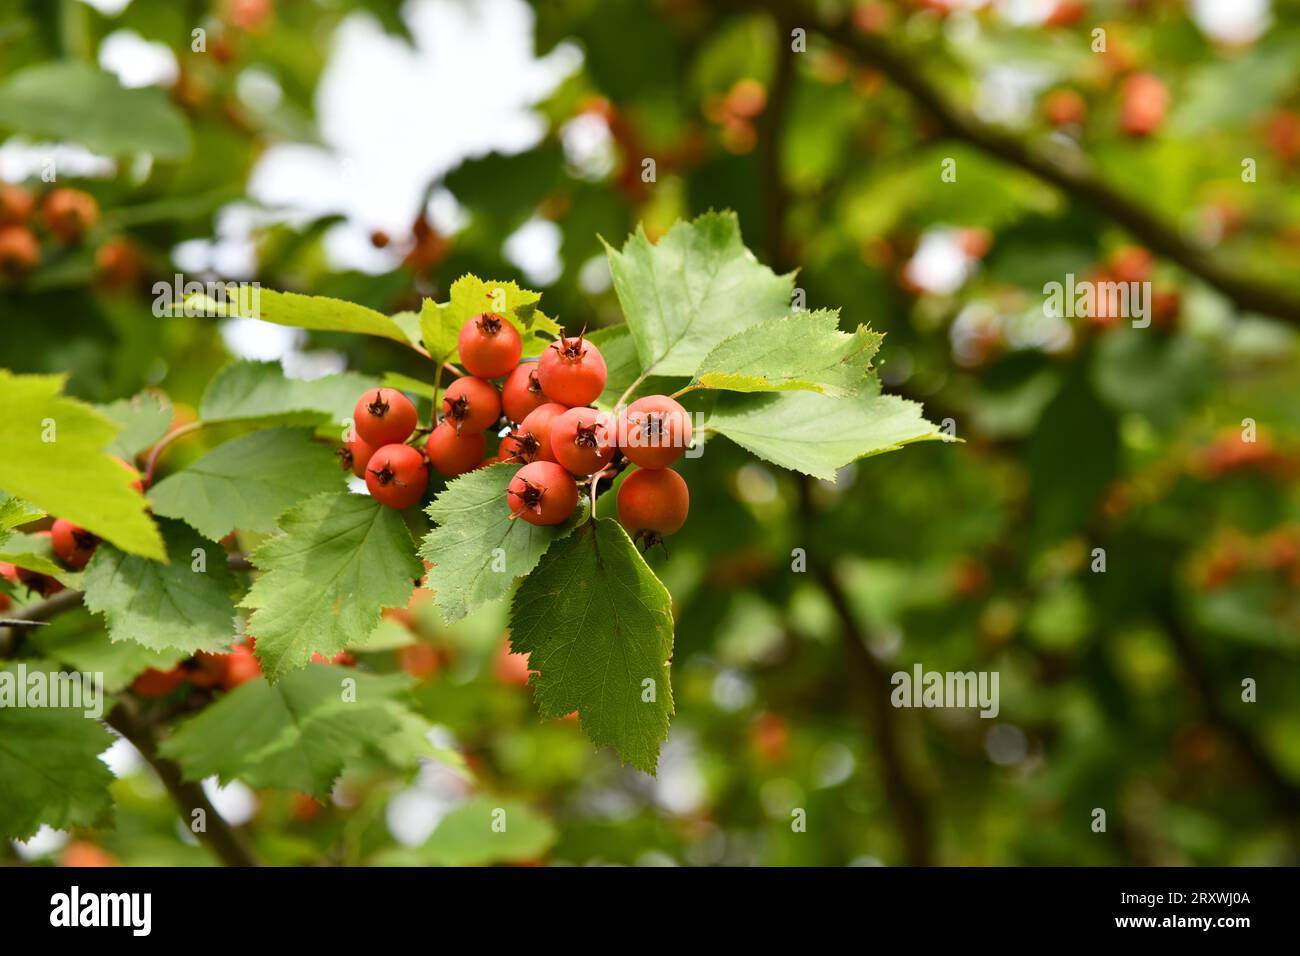 Scarlet hawthorn with ripe fruits Stock Photo